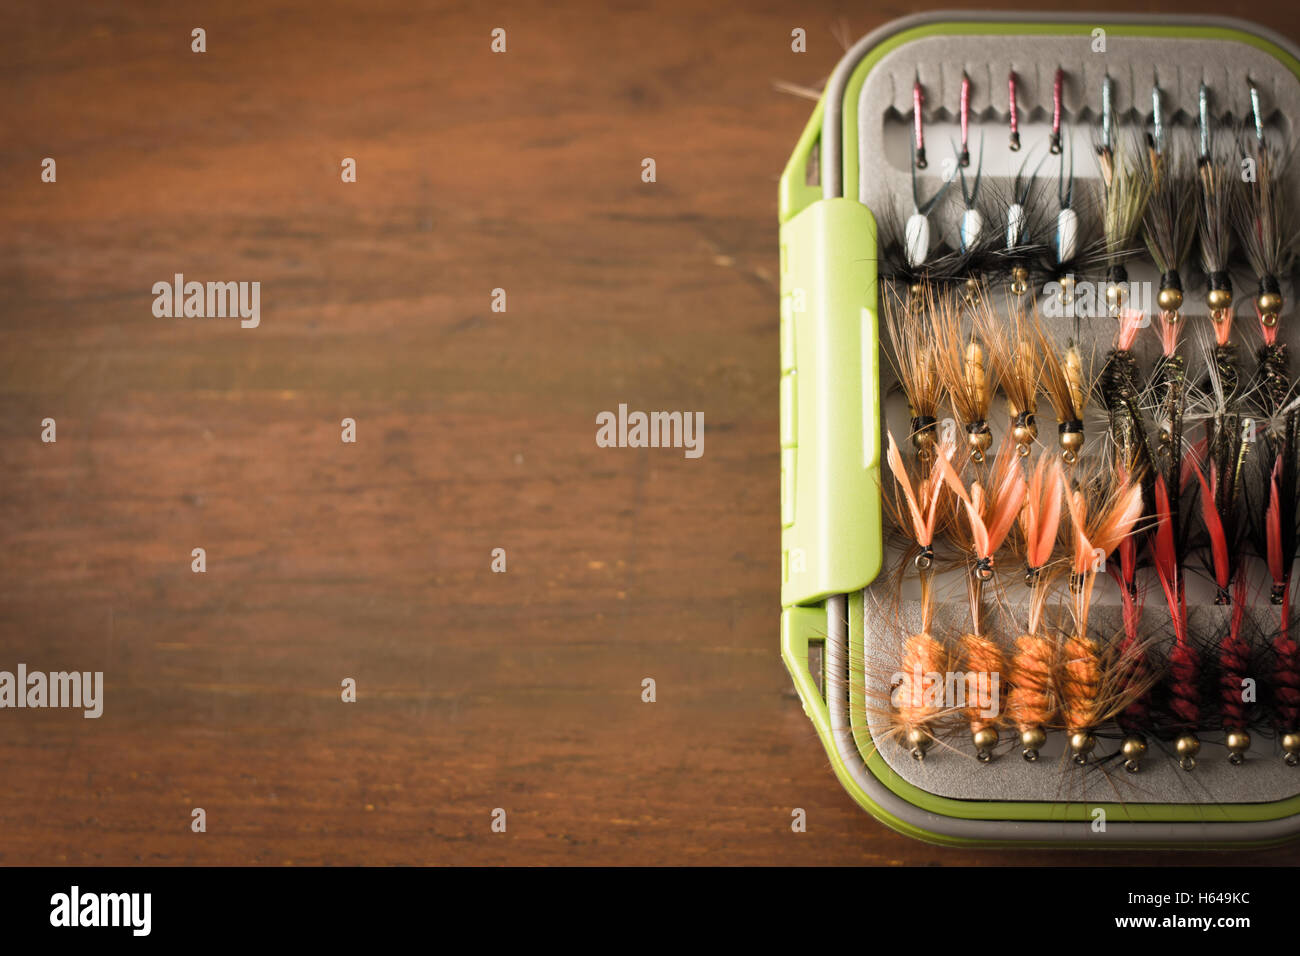 Fly fishing gear, which includes a reel and containers of flies with copy space Stock Photo